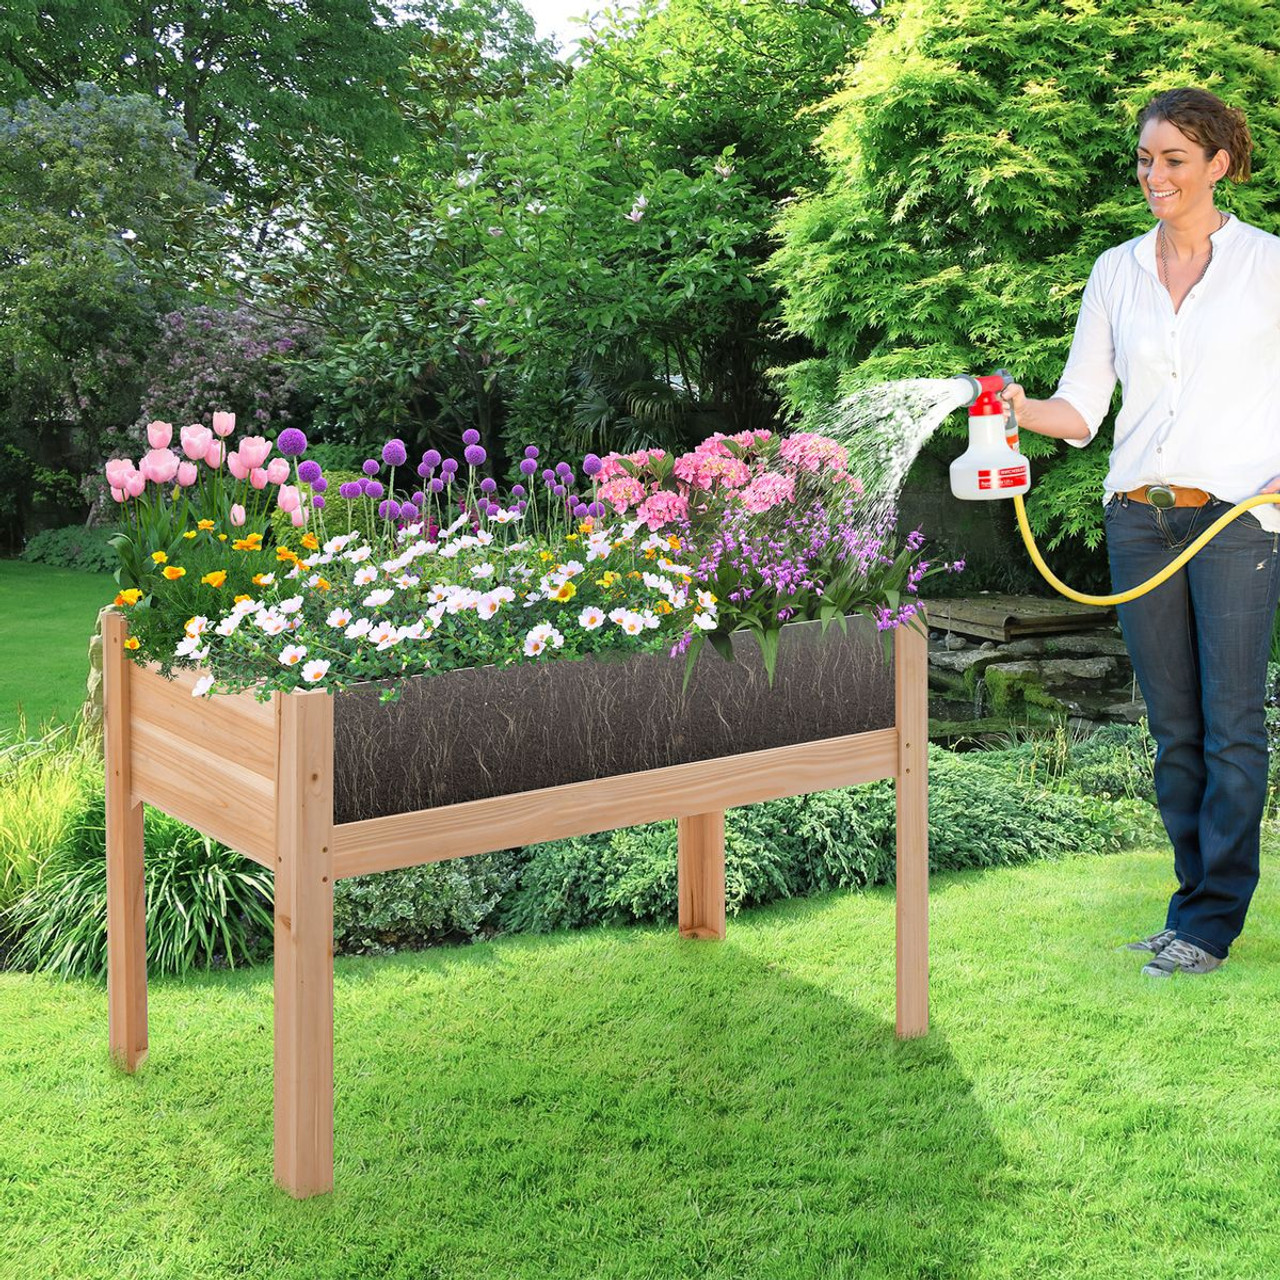 30-Inch Wooden Raised Garden Bed with Transparent Sides product image